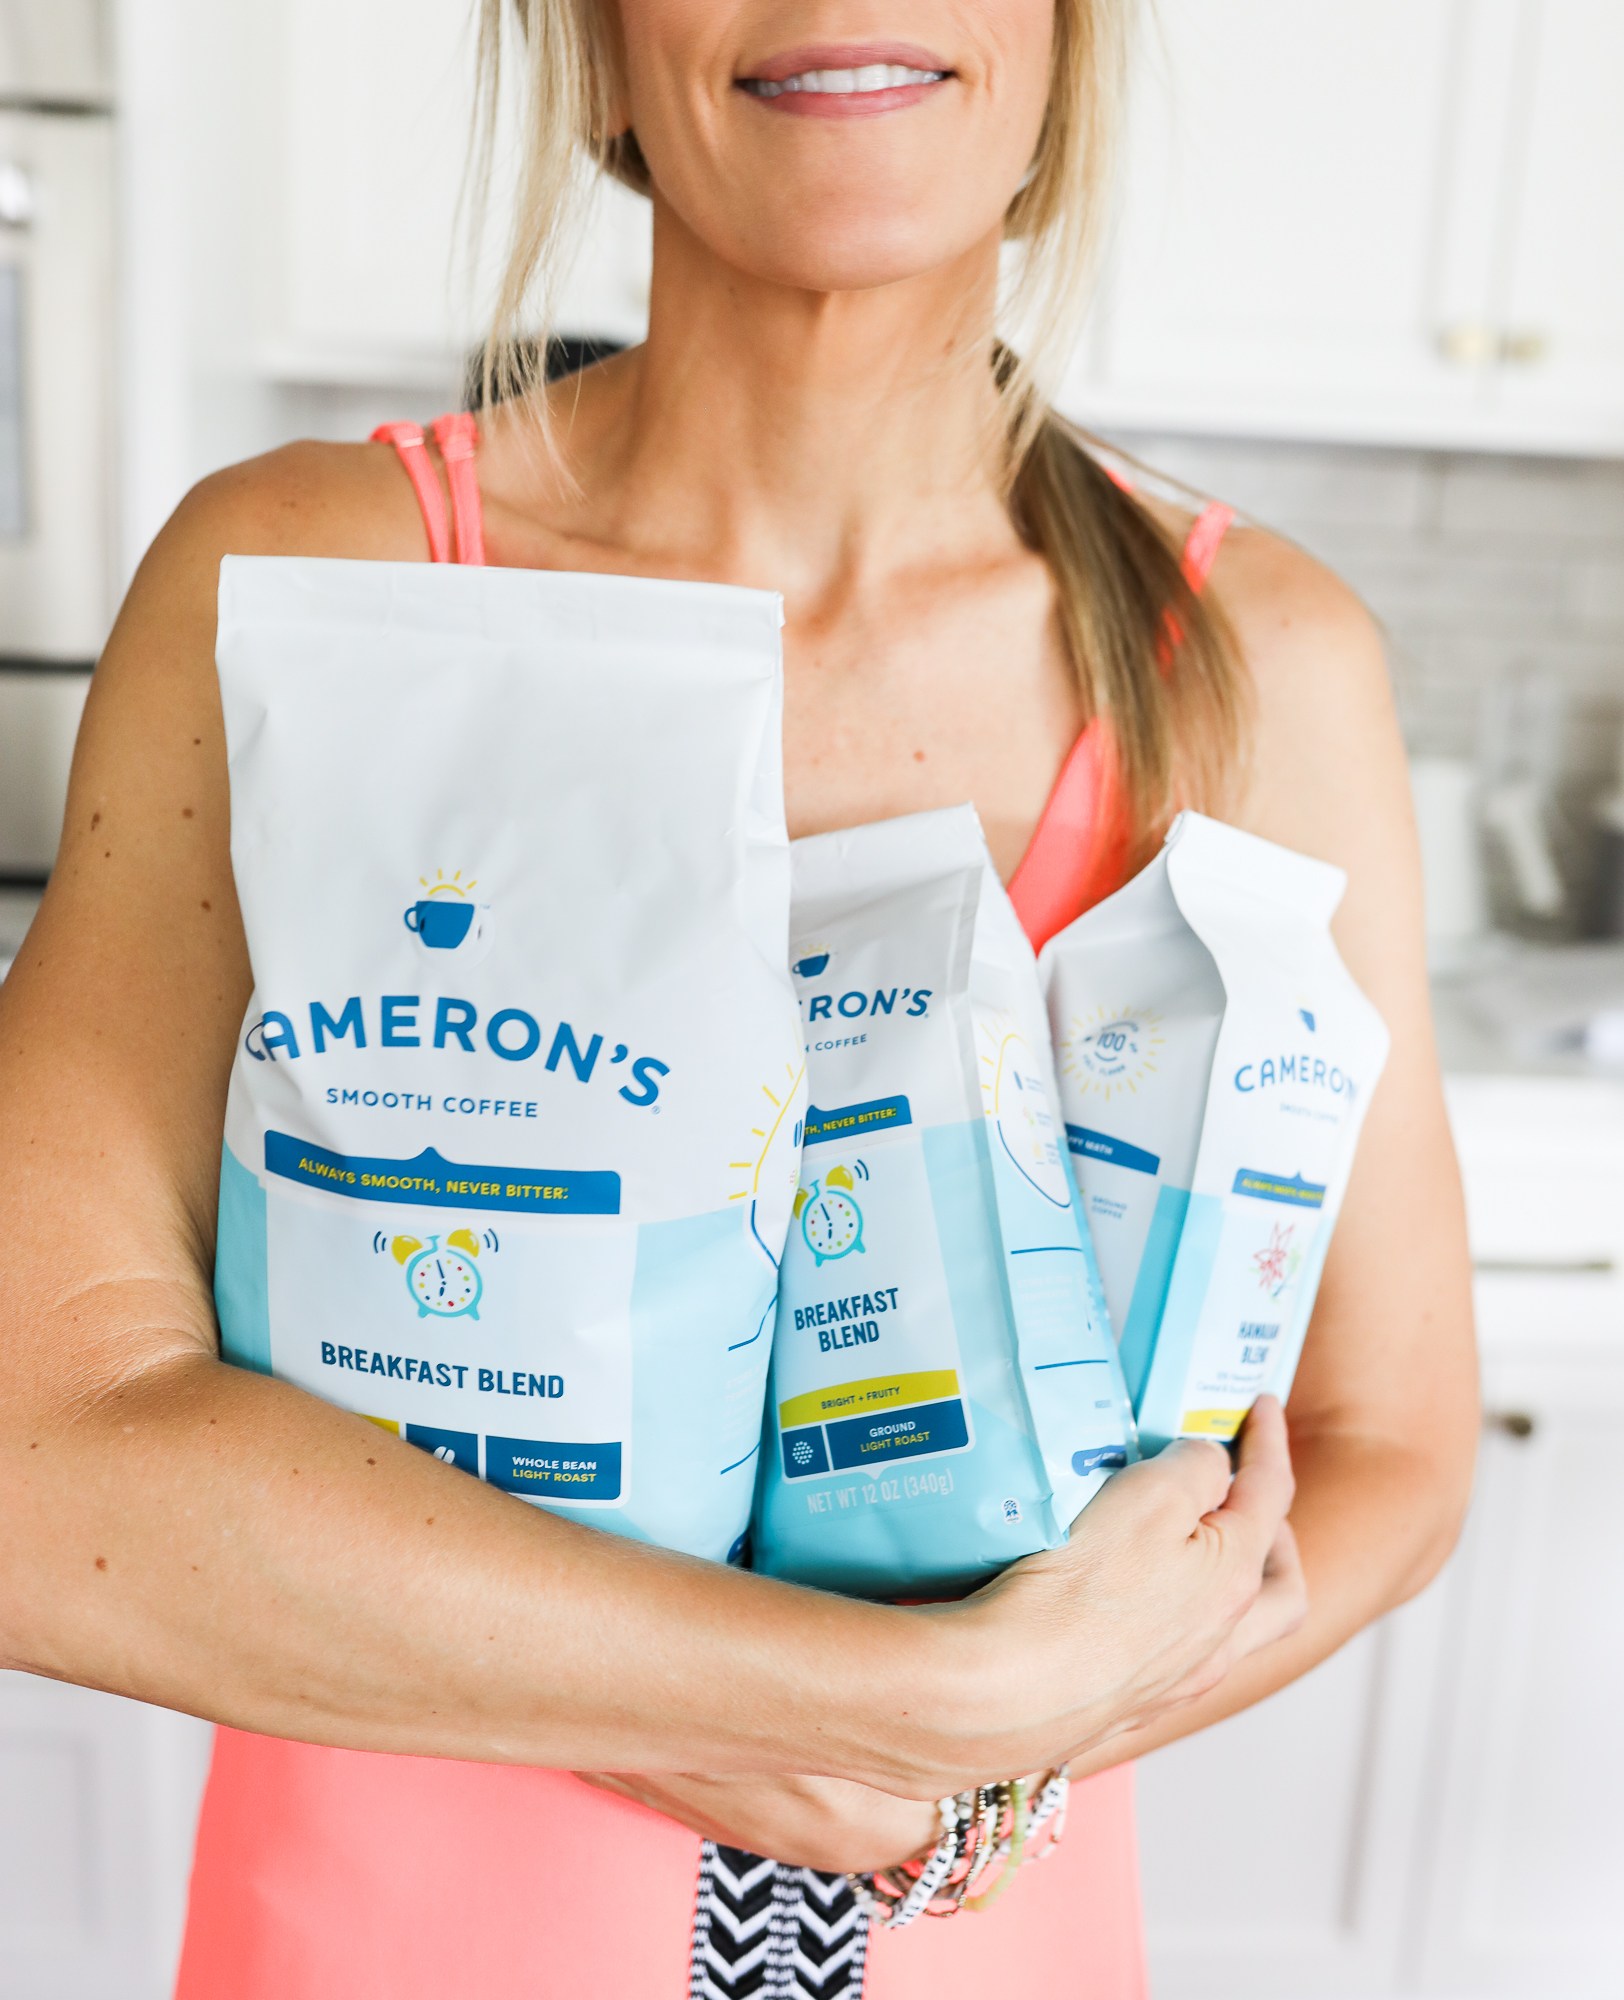 woman holding 3 bags of cameron's coffee